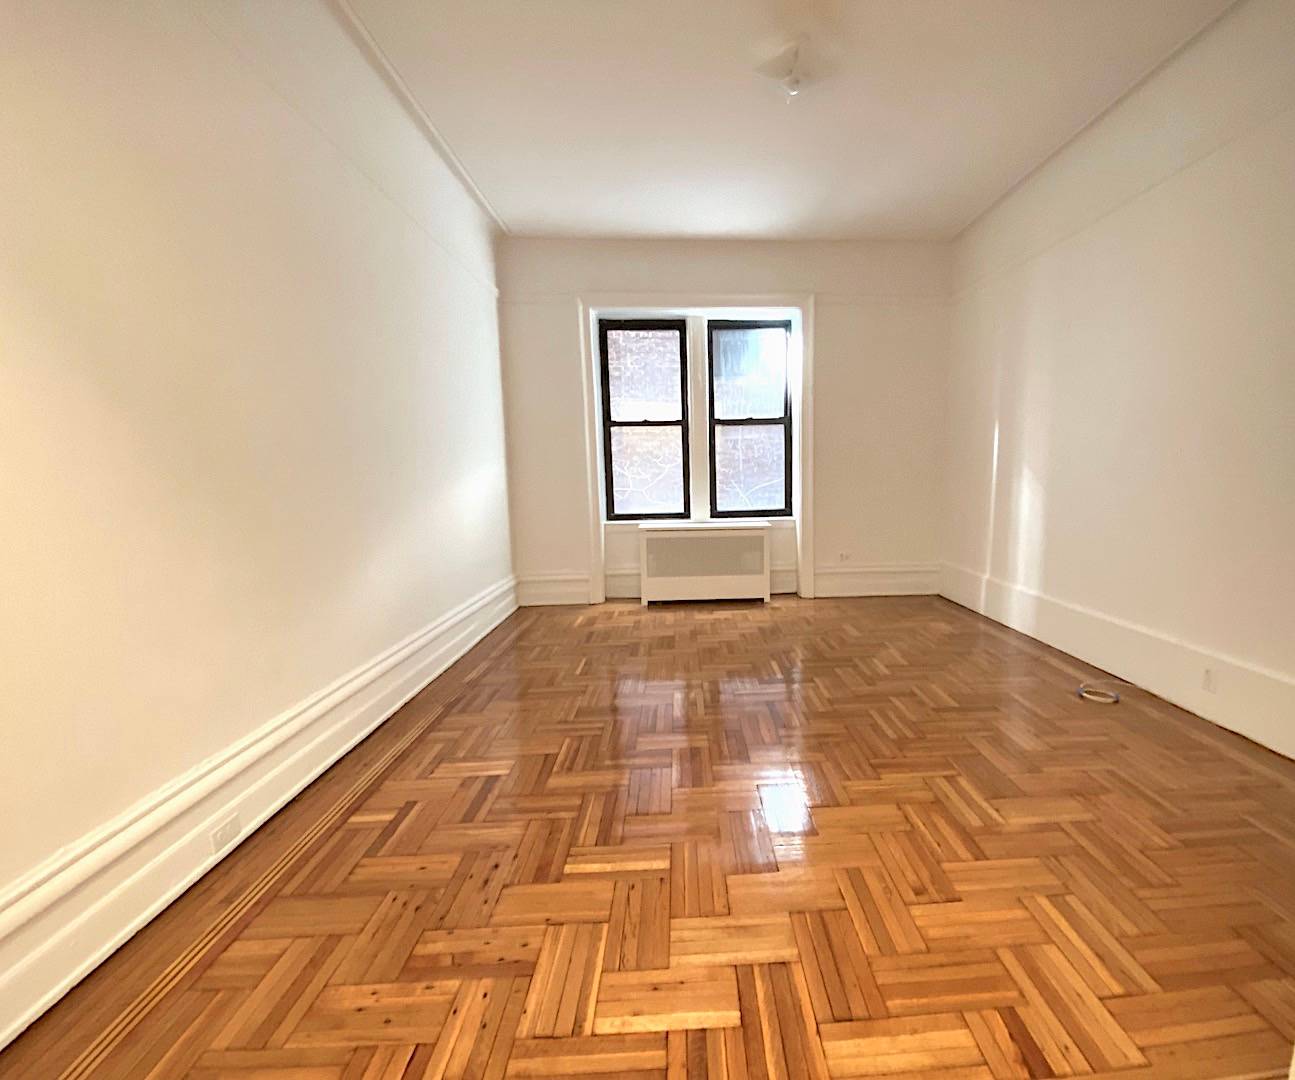 No broker fee for this classic Brooklyn Heights prewar 3 bedroom in full service elevator building.